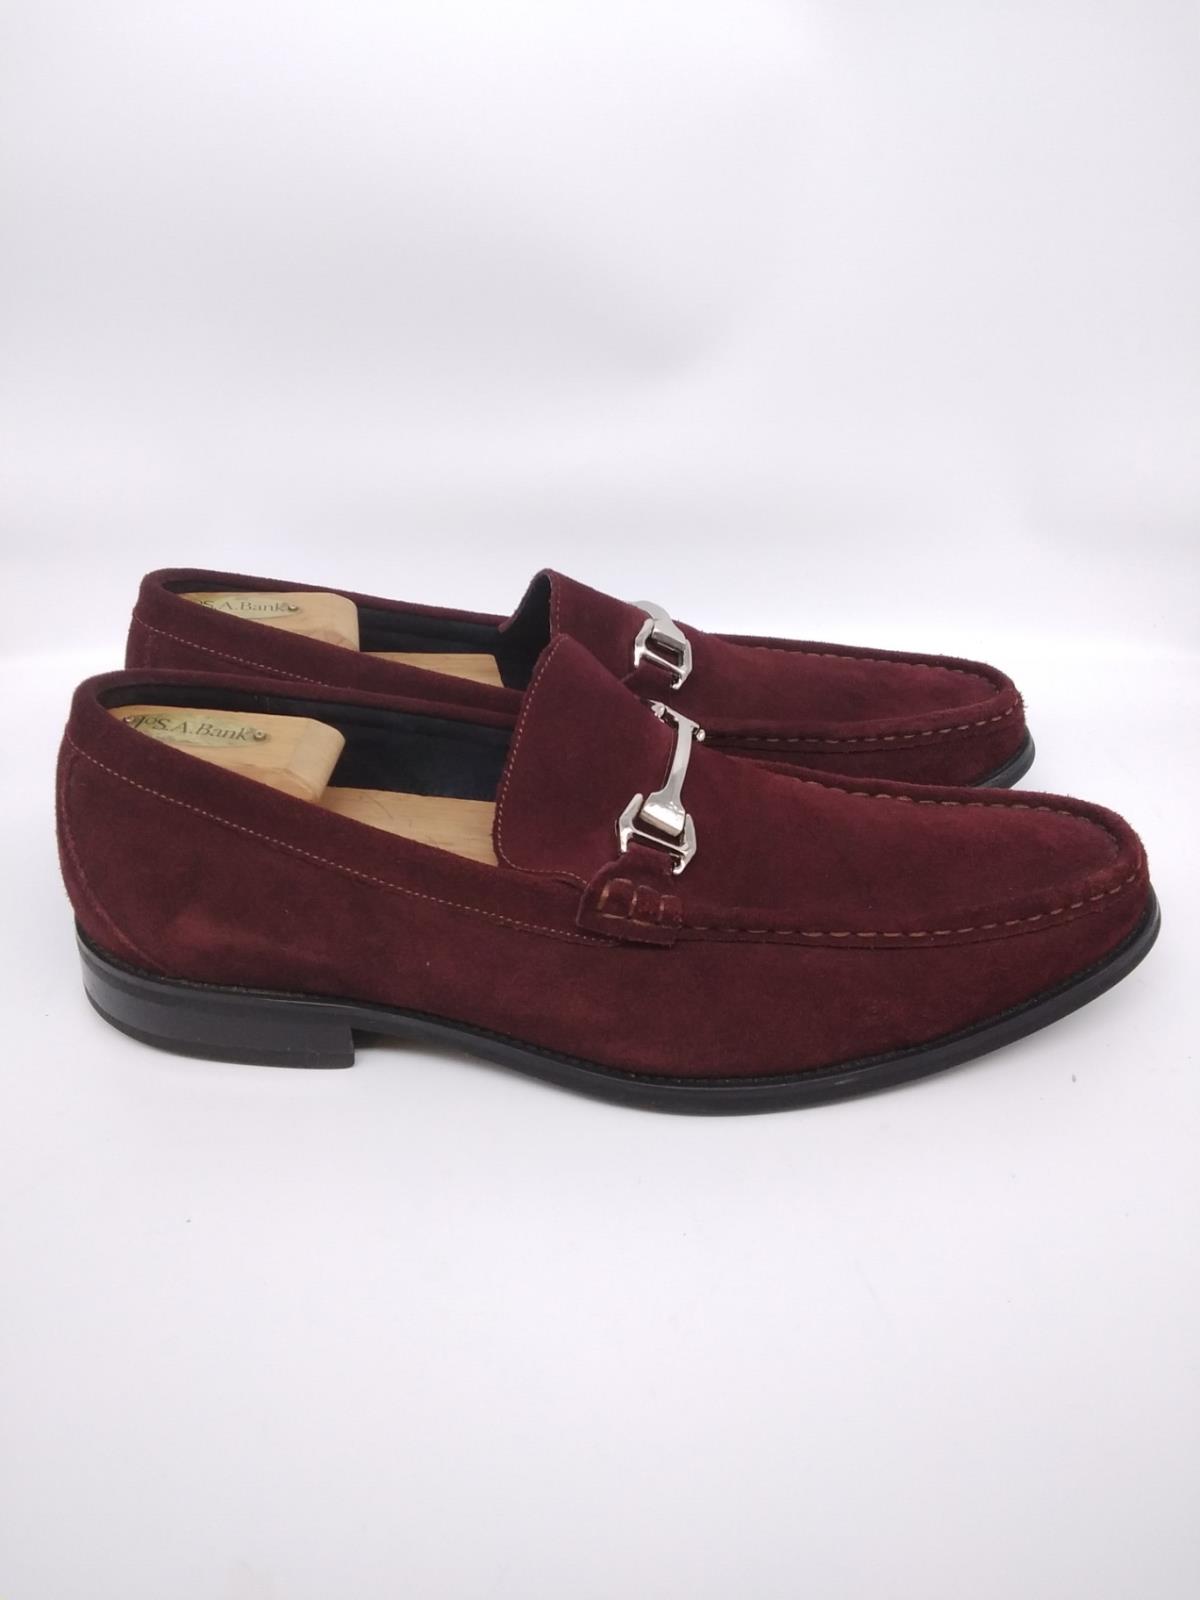 Stacy Adams Mens Burgundy Slip On Suede Leather Buckle Loafer Shoes ...